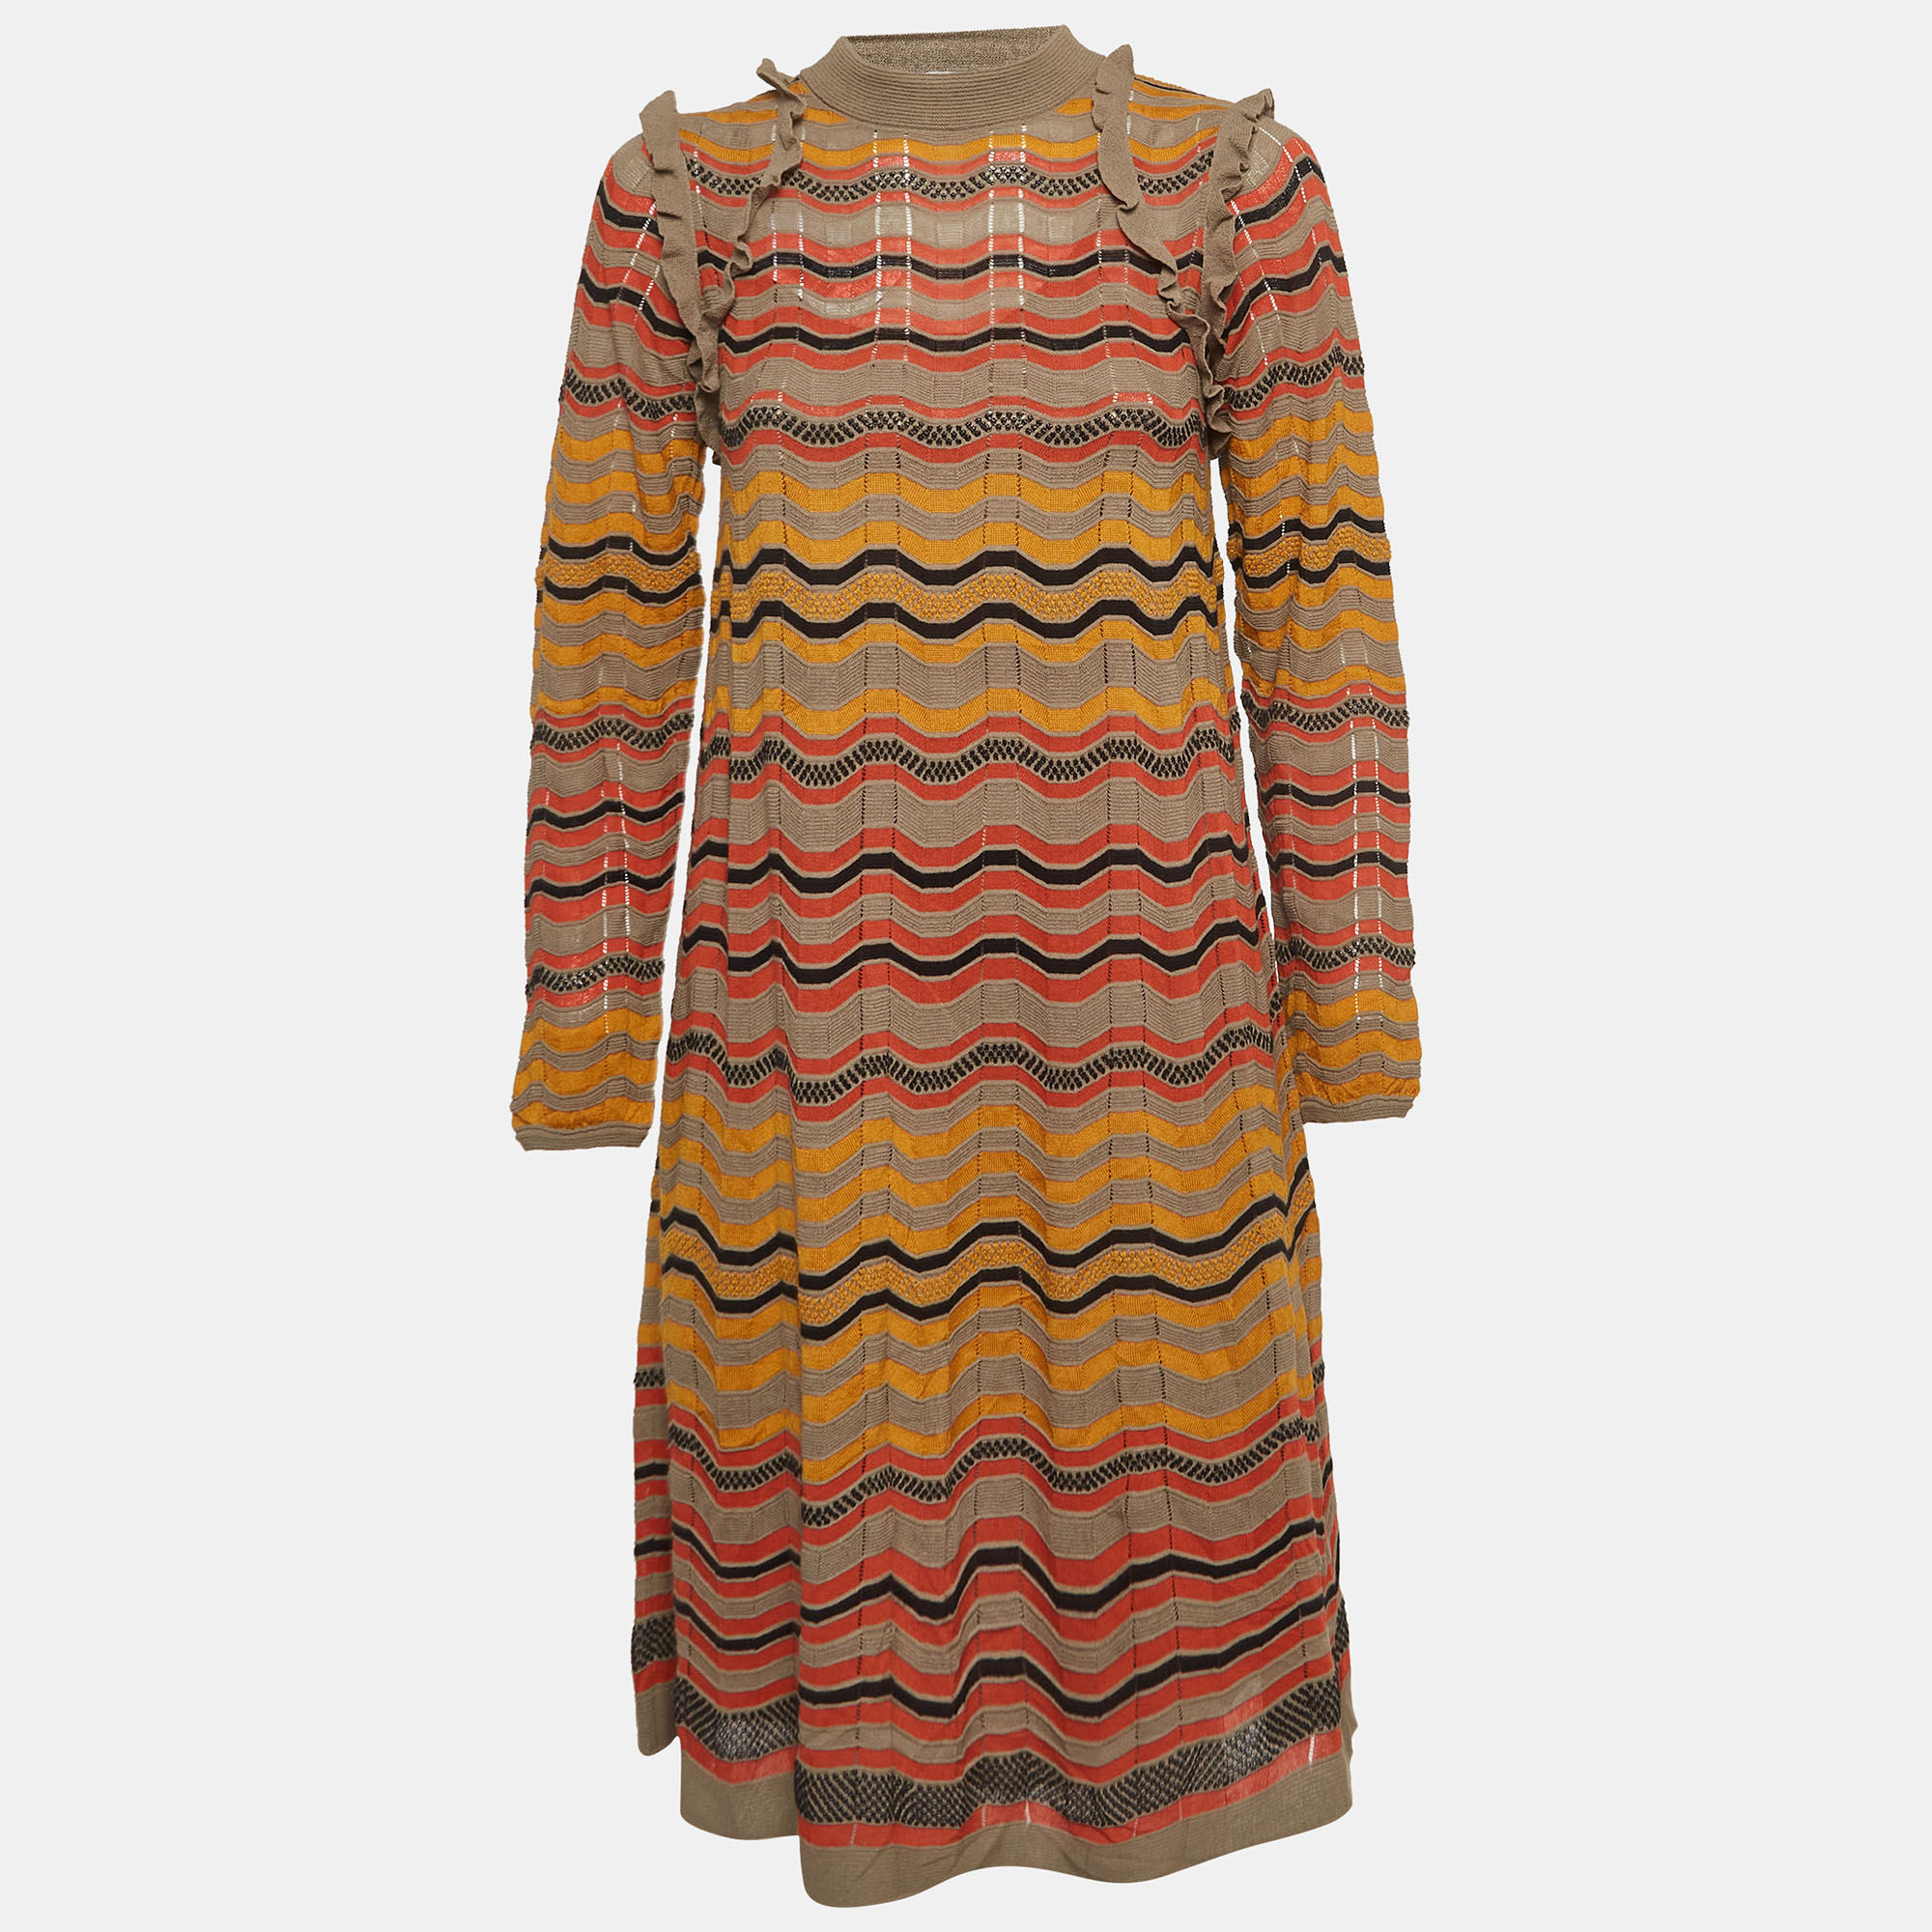 M missoni multicolor patterned knit ruffled dress s